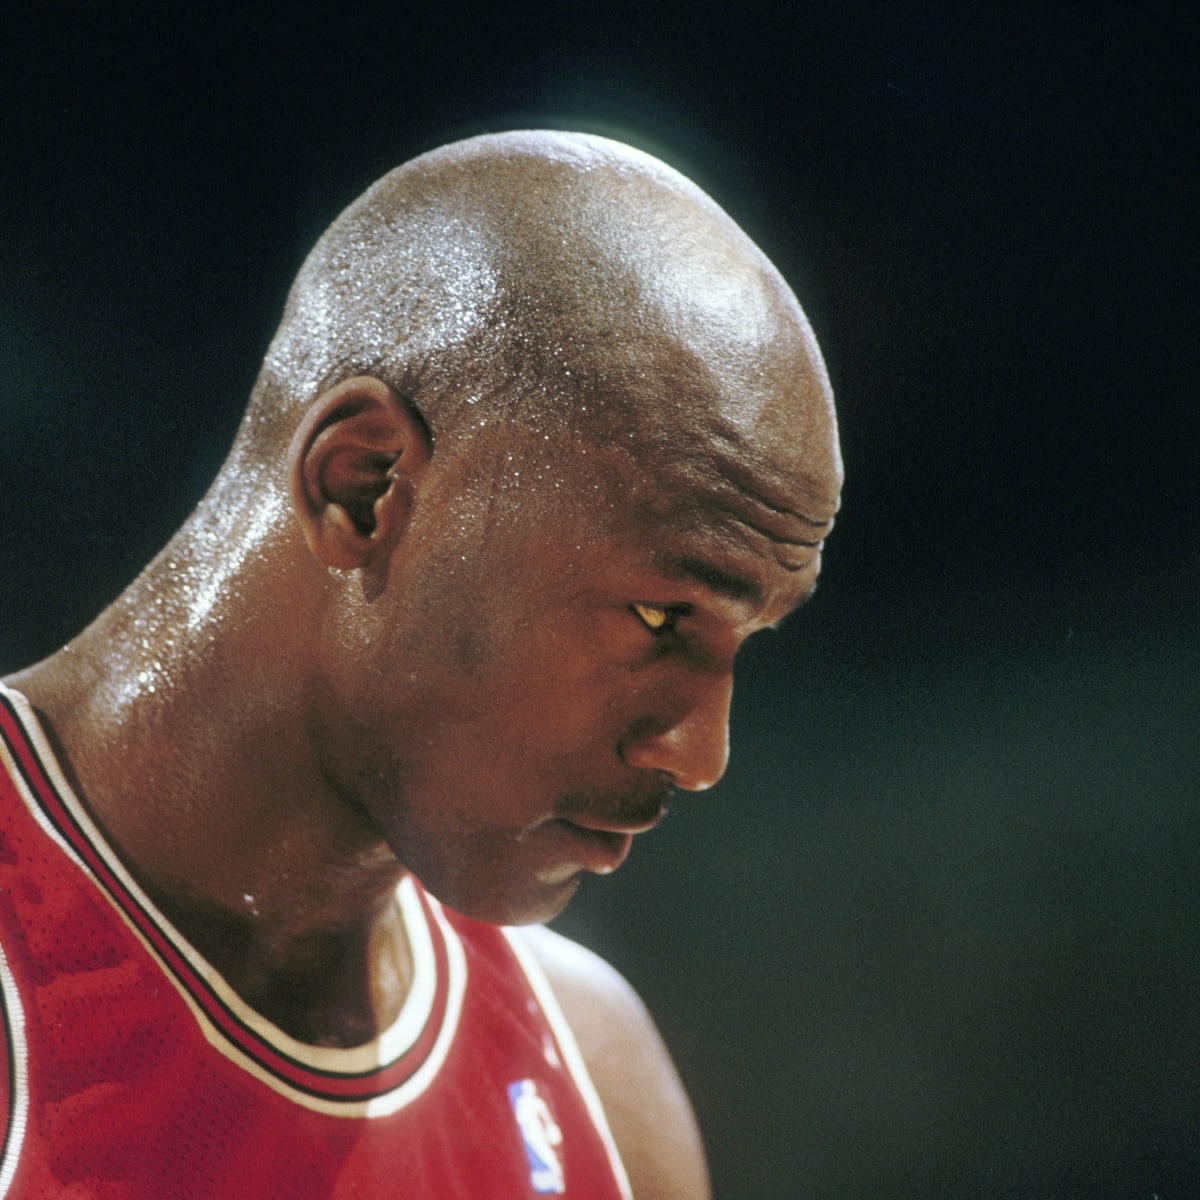 How to Win This Signed Michael Jordan Jersey